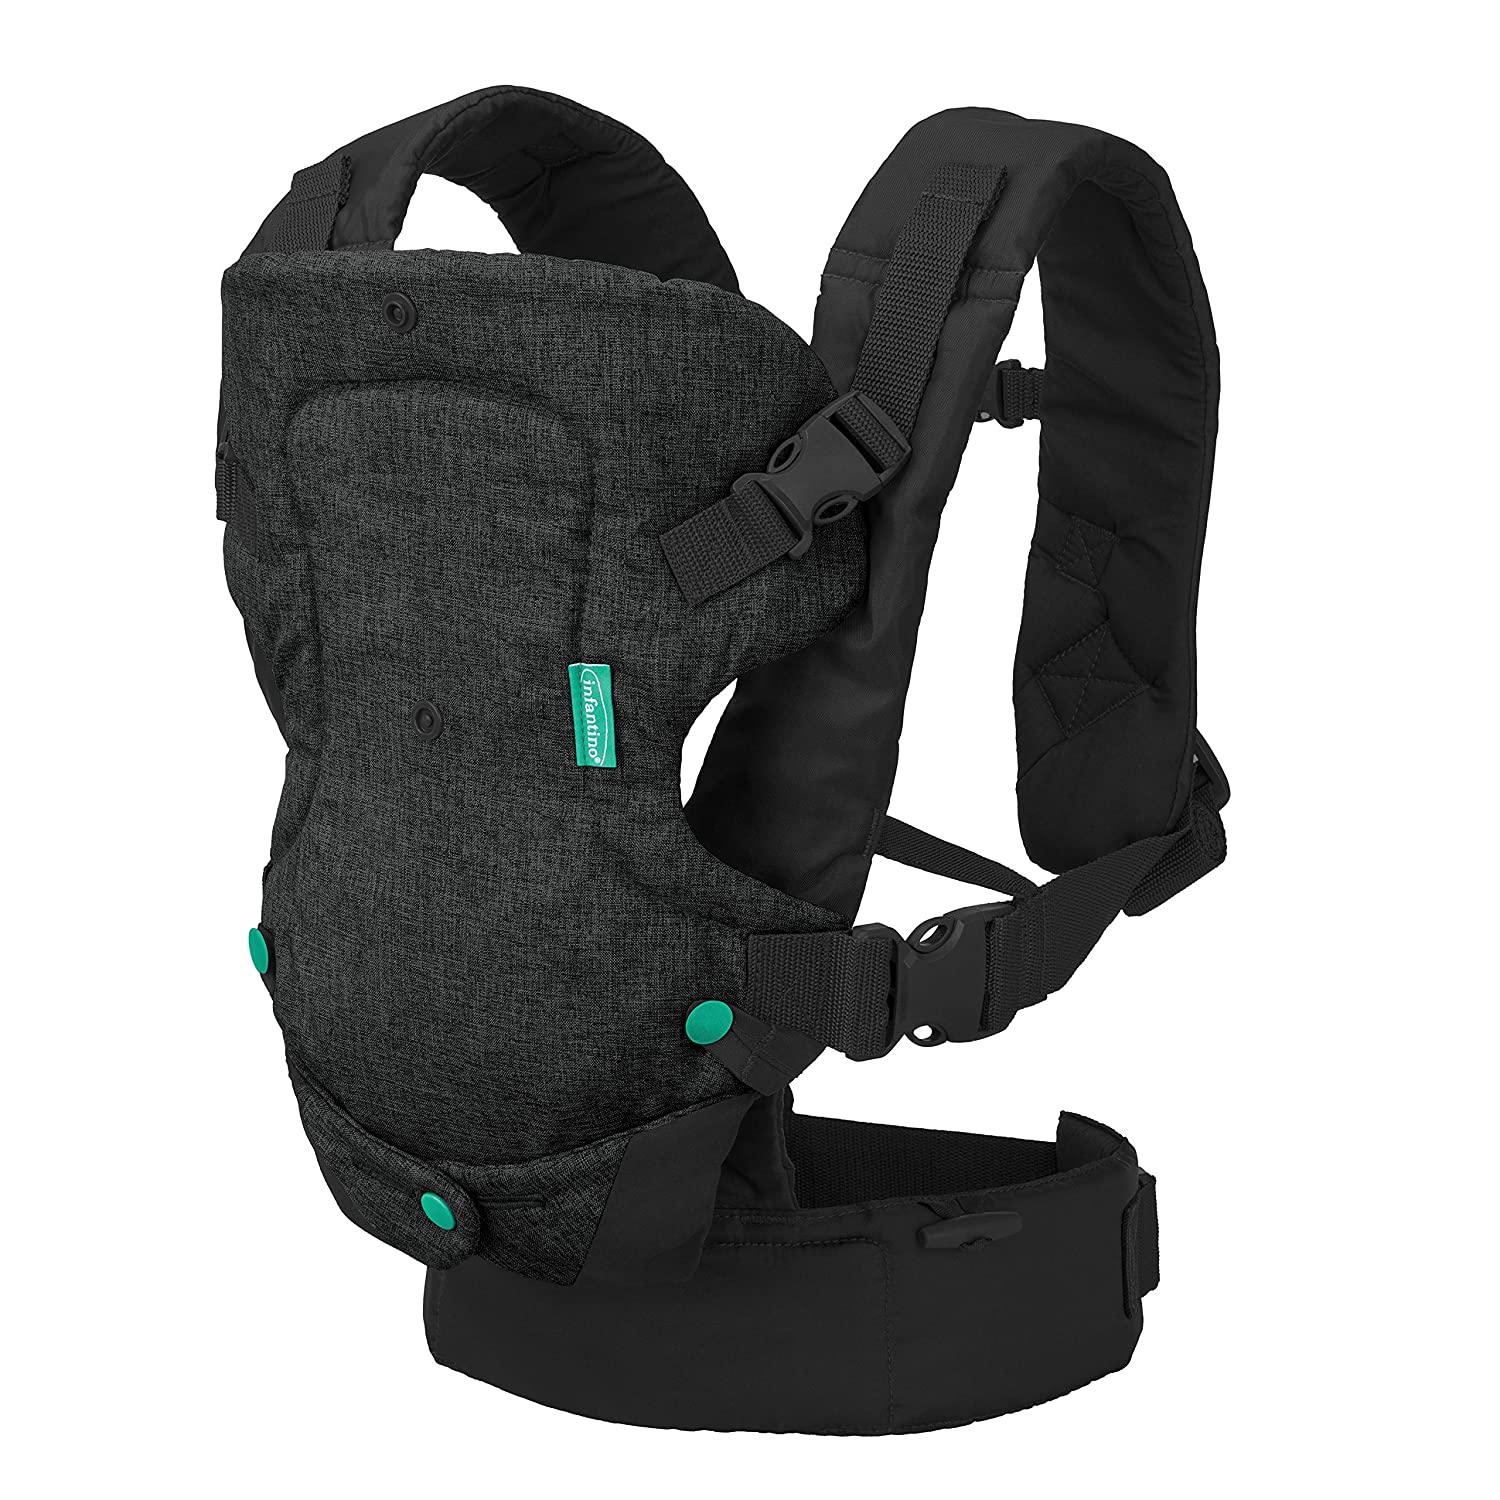 acbags.com baby carrier Flip 4-in-1 Convertible Carrier - Black